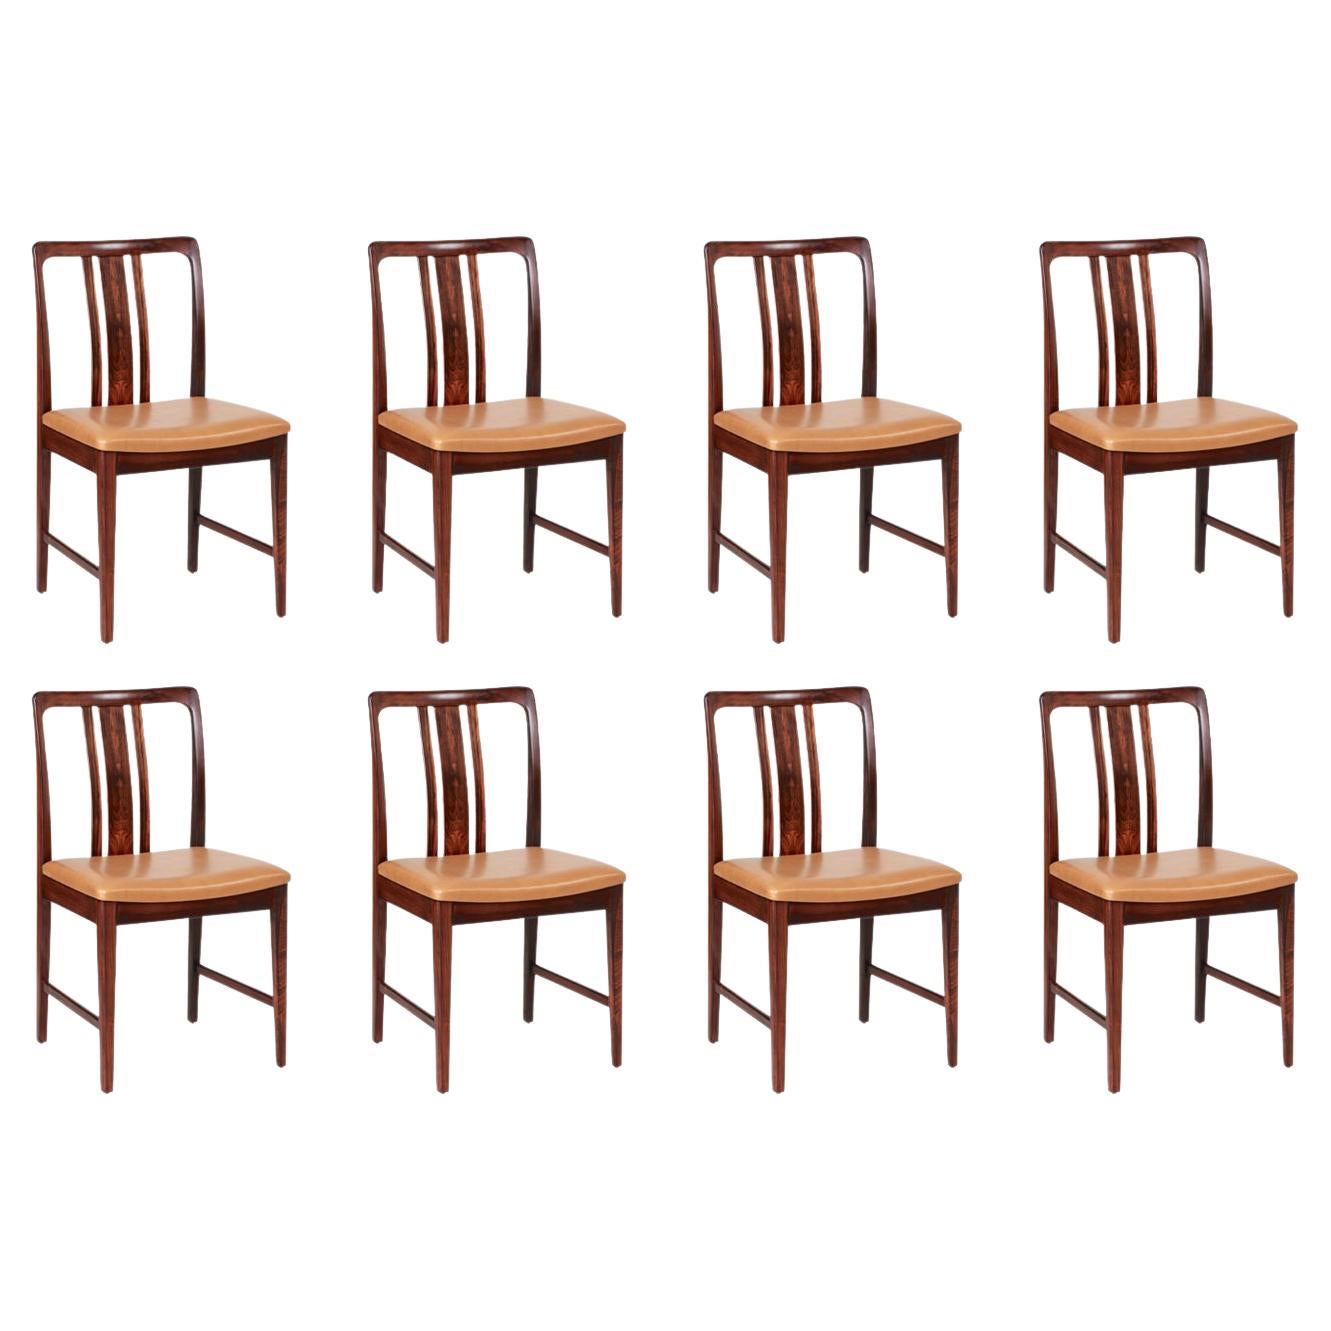 Swedish Modern Rosewood & Leather Dining Chairs by Linde Nilsson